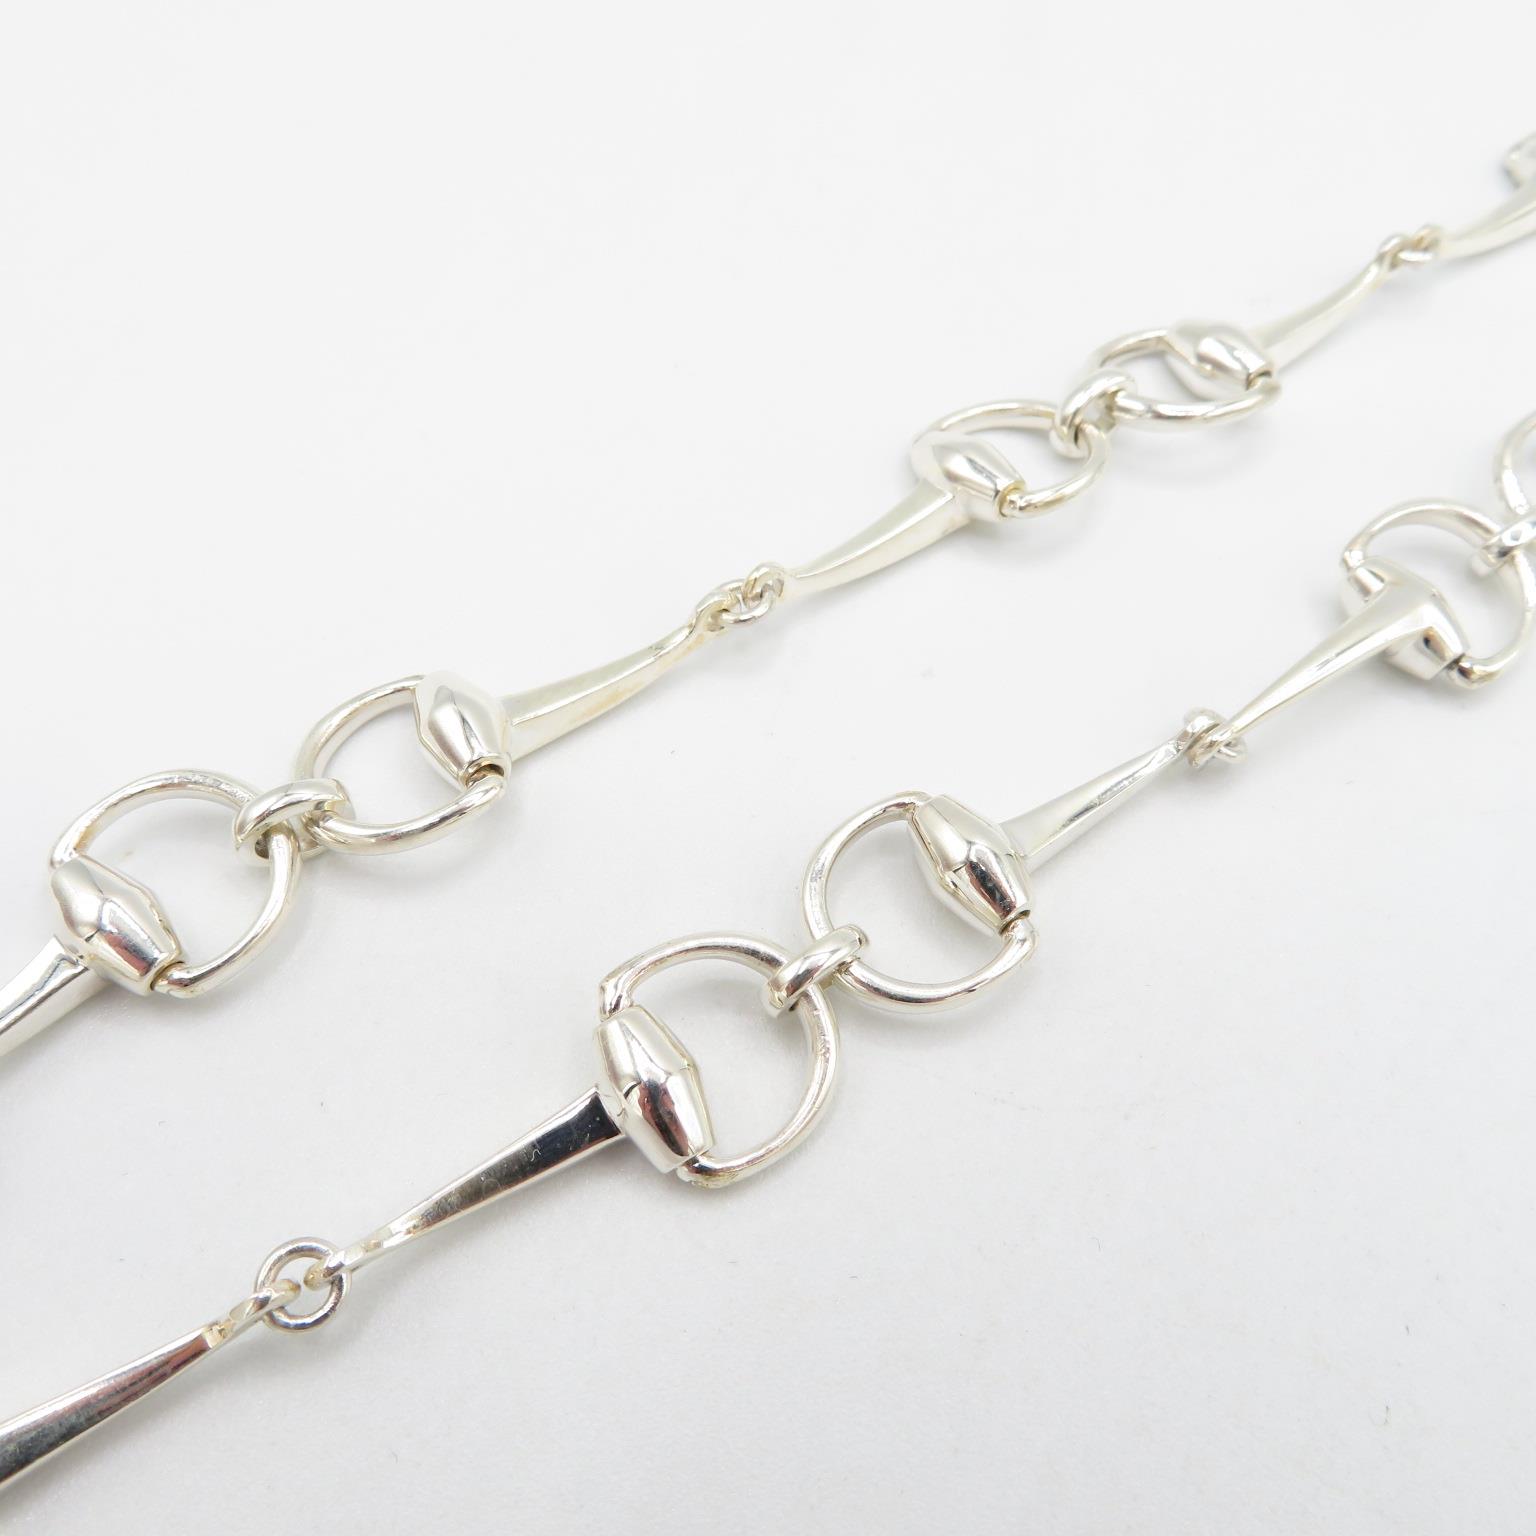 HM 925 Sterling Silver Stirrup Link design necklace in excellent condition (51.5g) length 44cm - Image 3 of 5